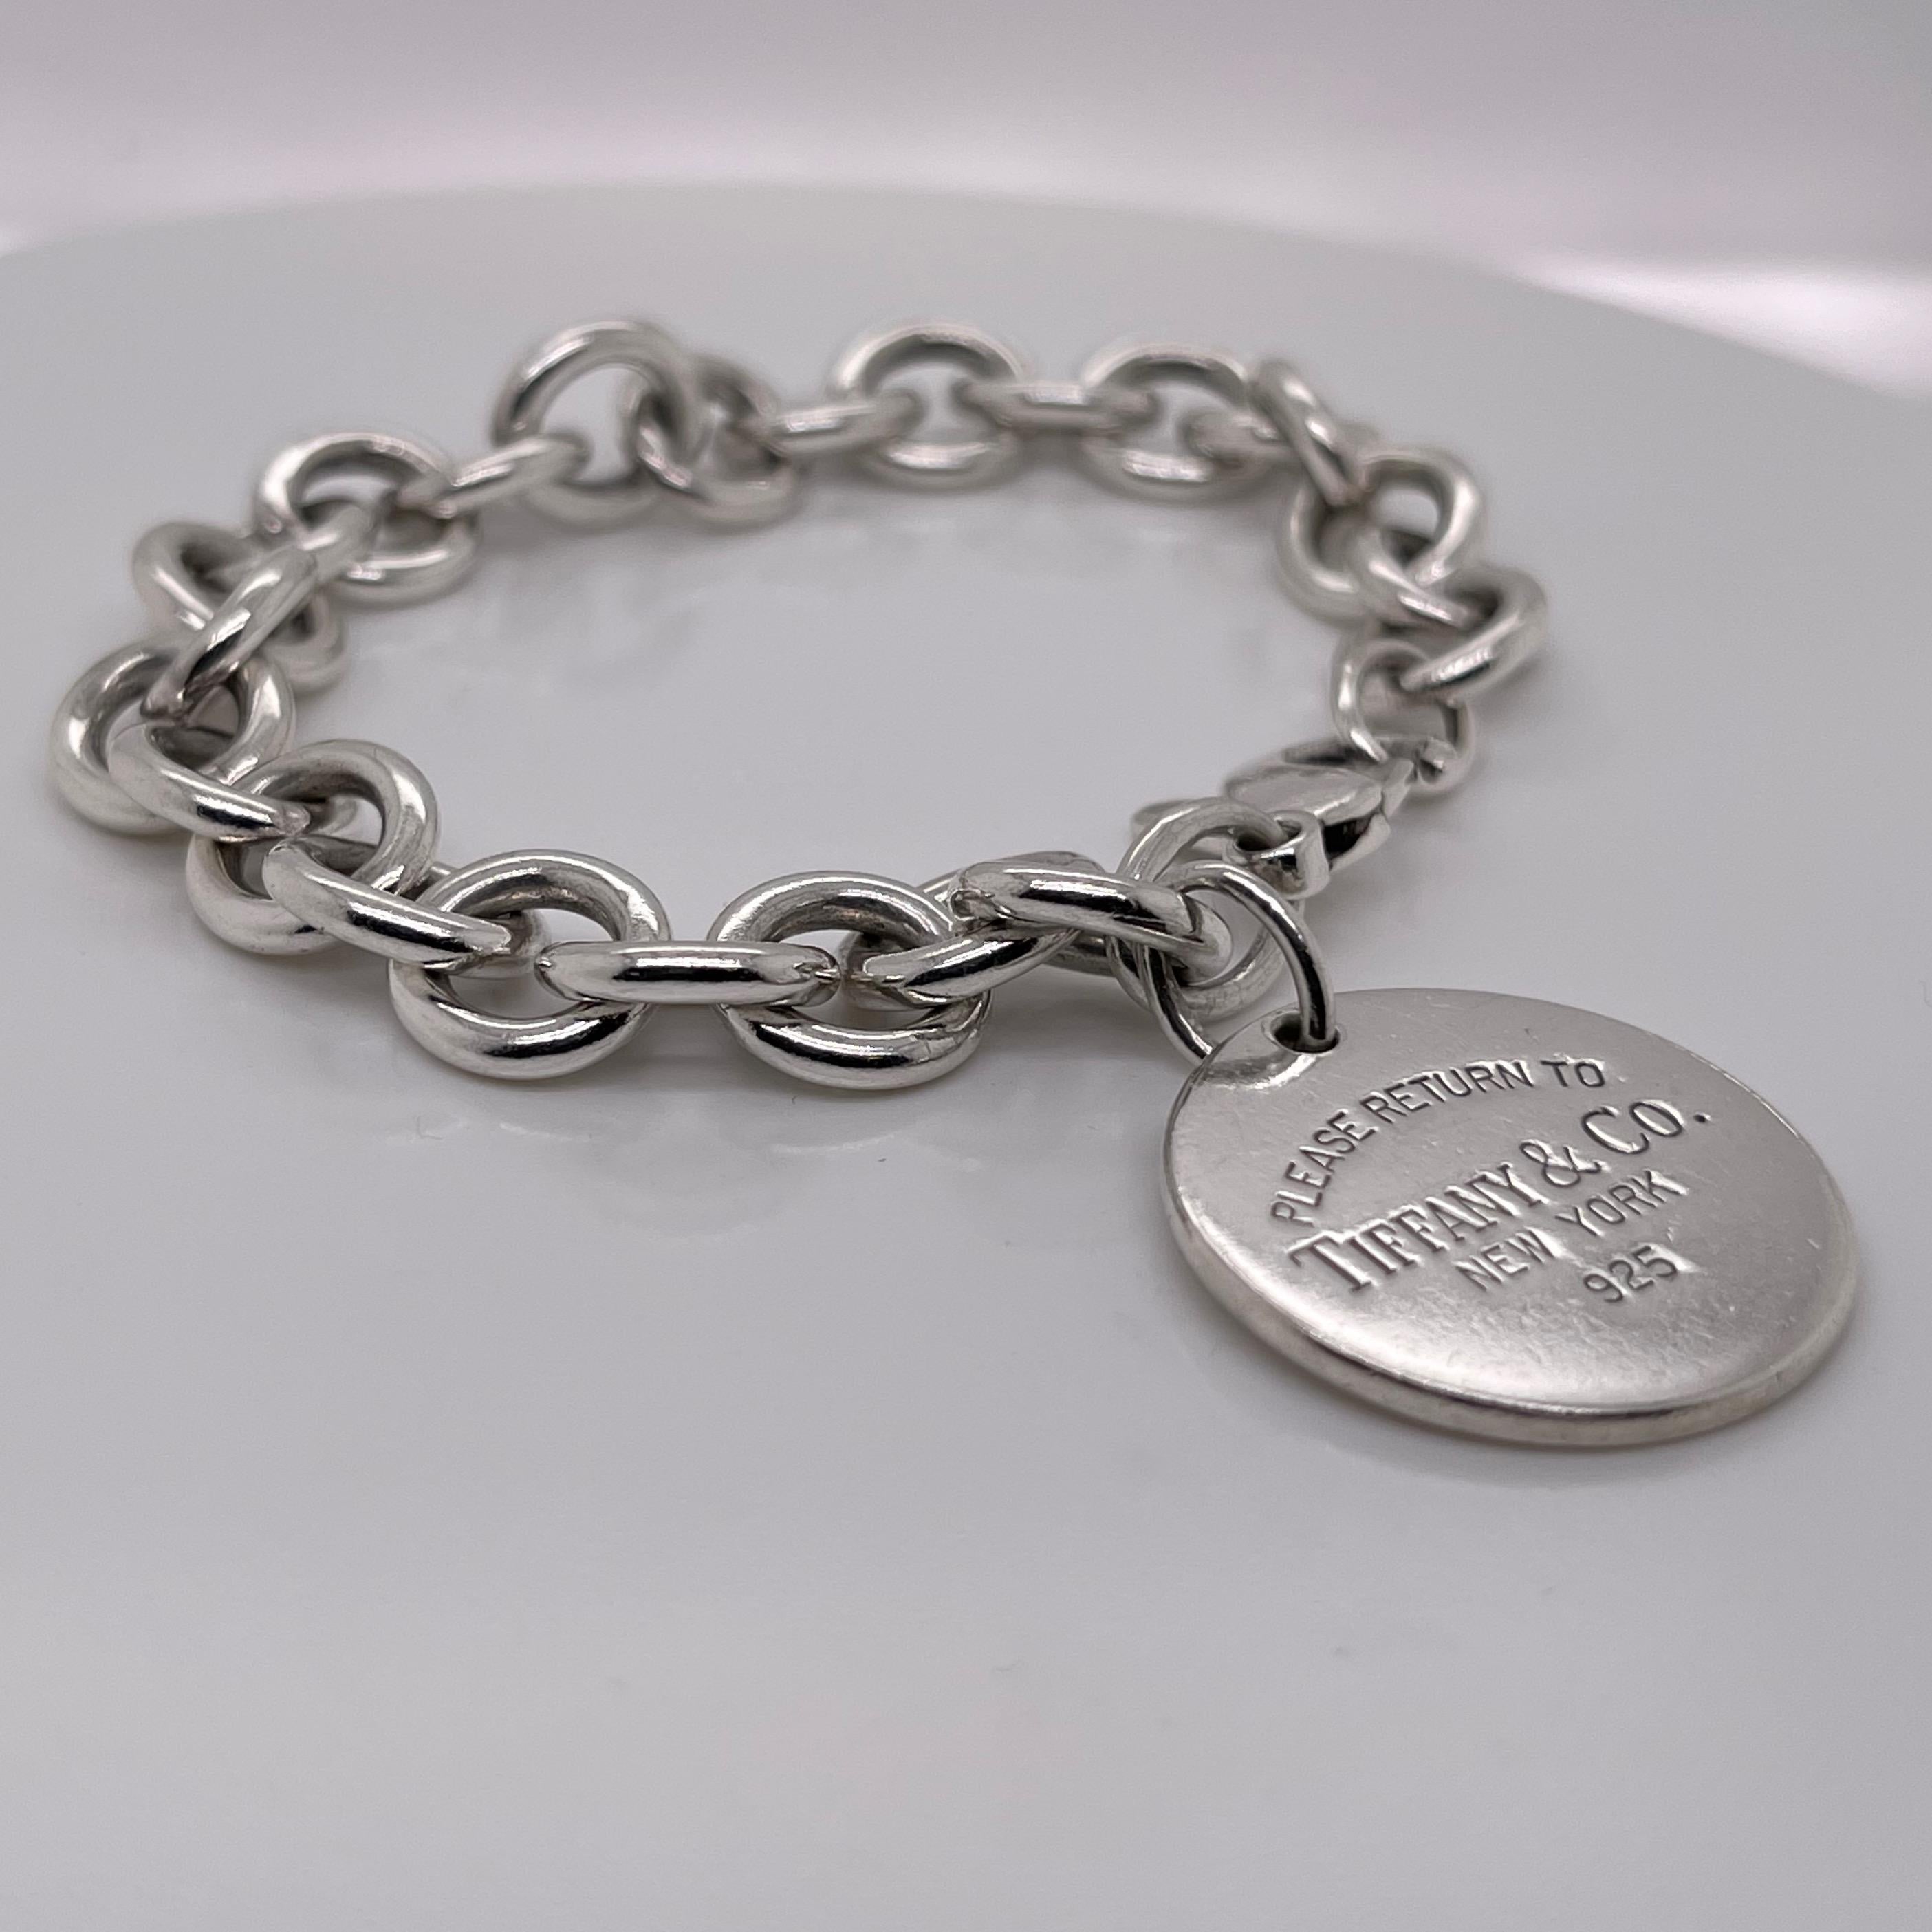 10.2 Inch 925 Sterling Silver Starter Charm Bracelet with Barrel Snap Clasp 